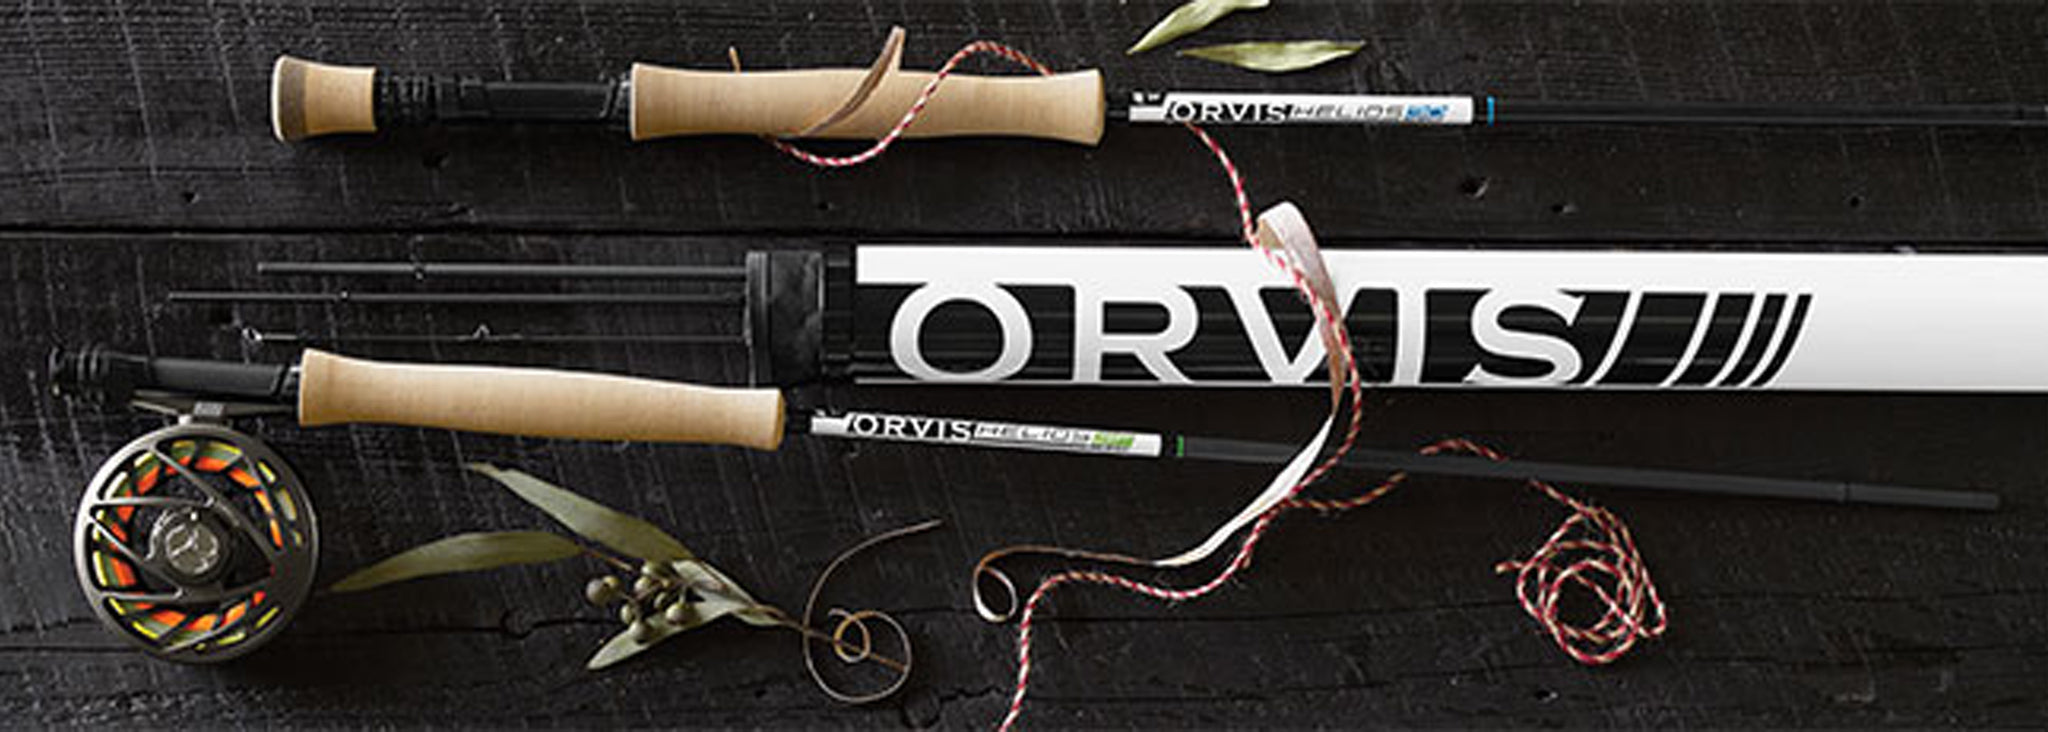 orvis helios 3 5 weight review